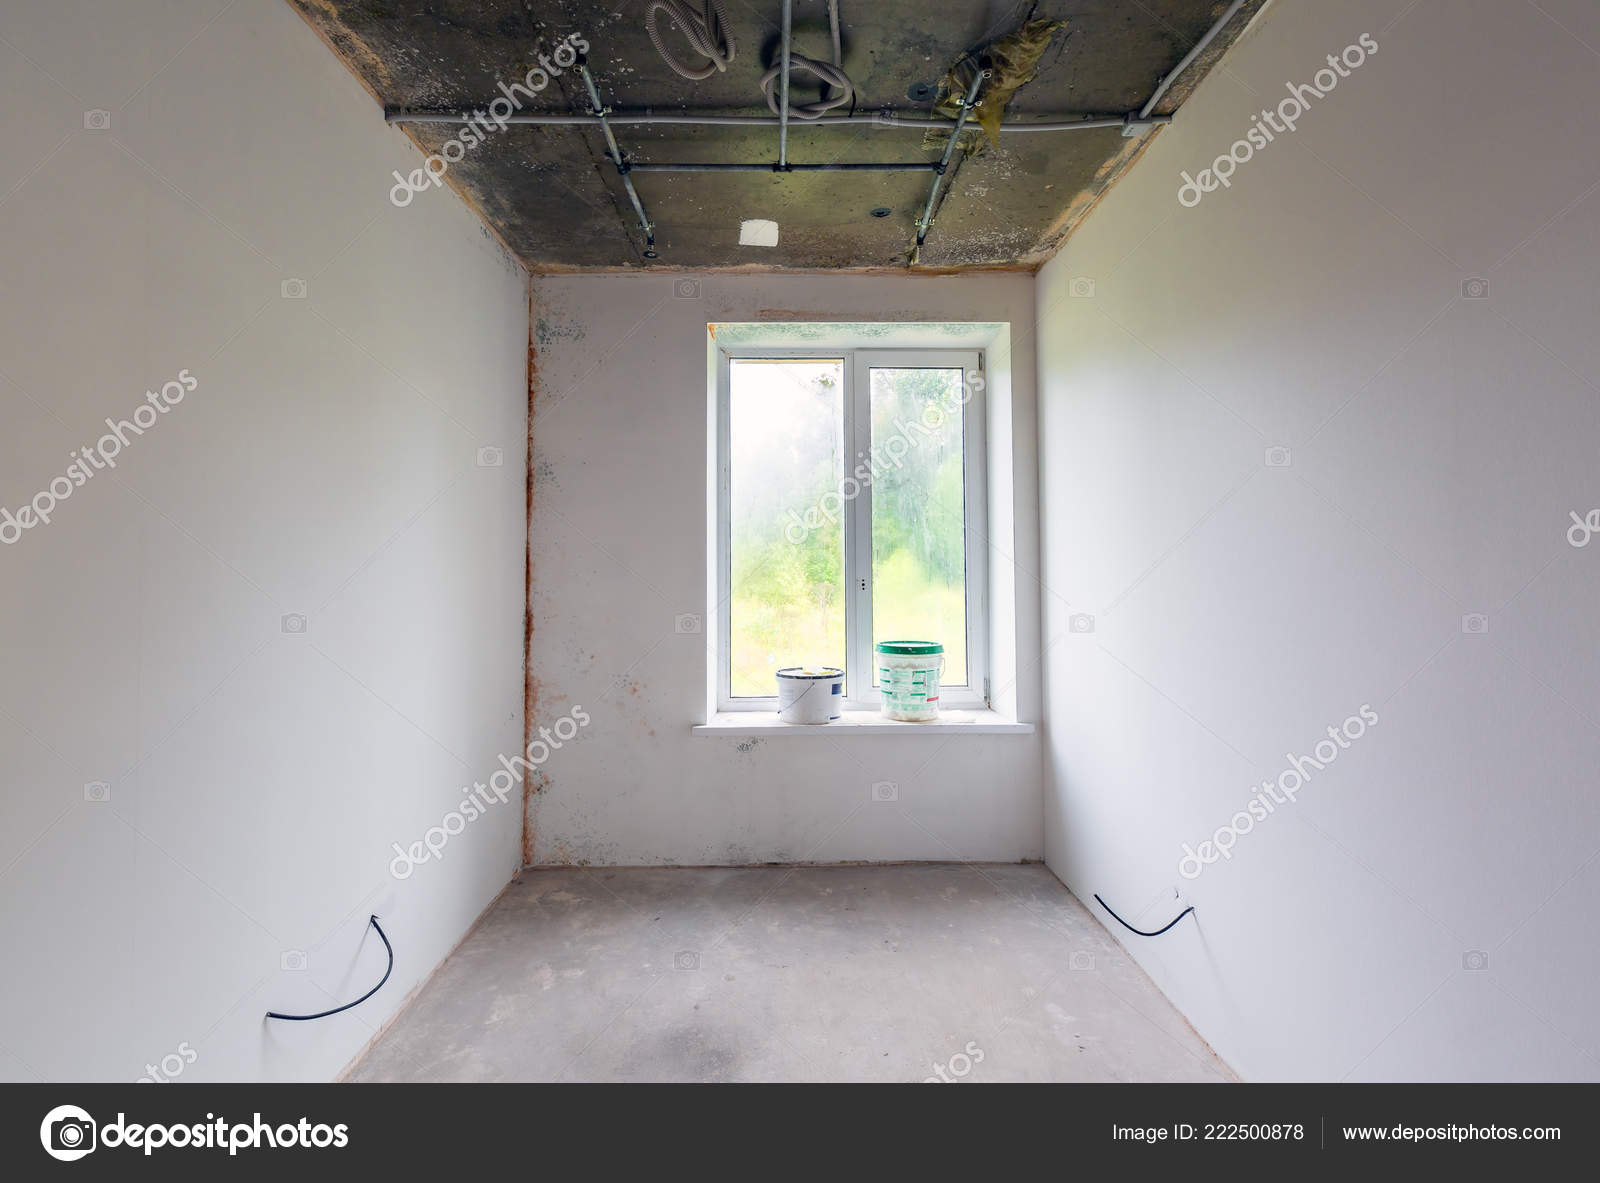 Small Room With White Walls And Electrical Wires Paint And Putty